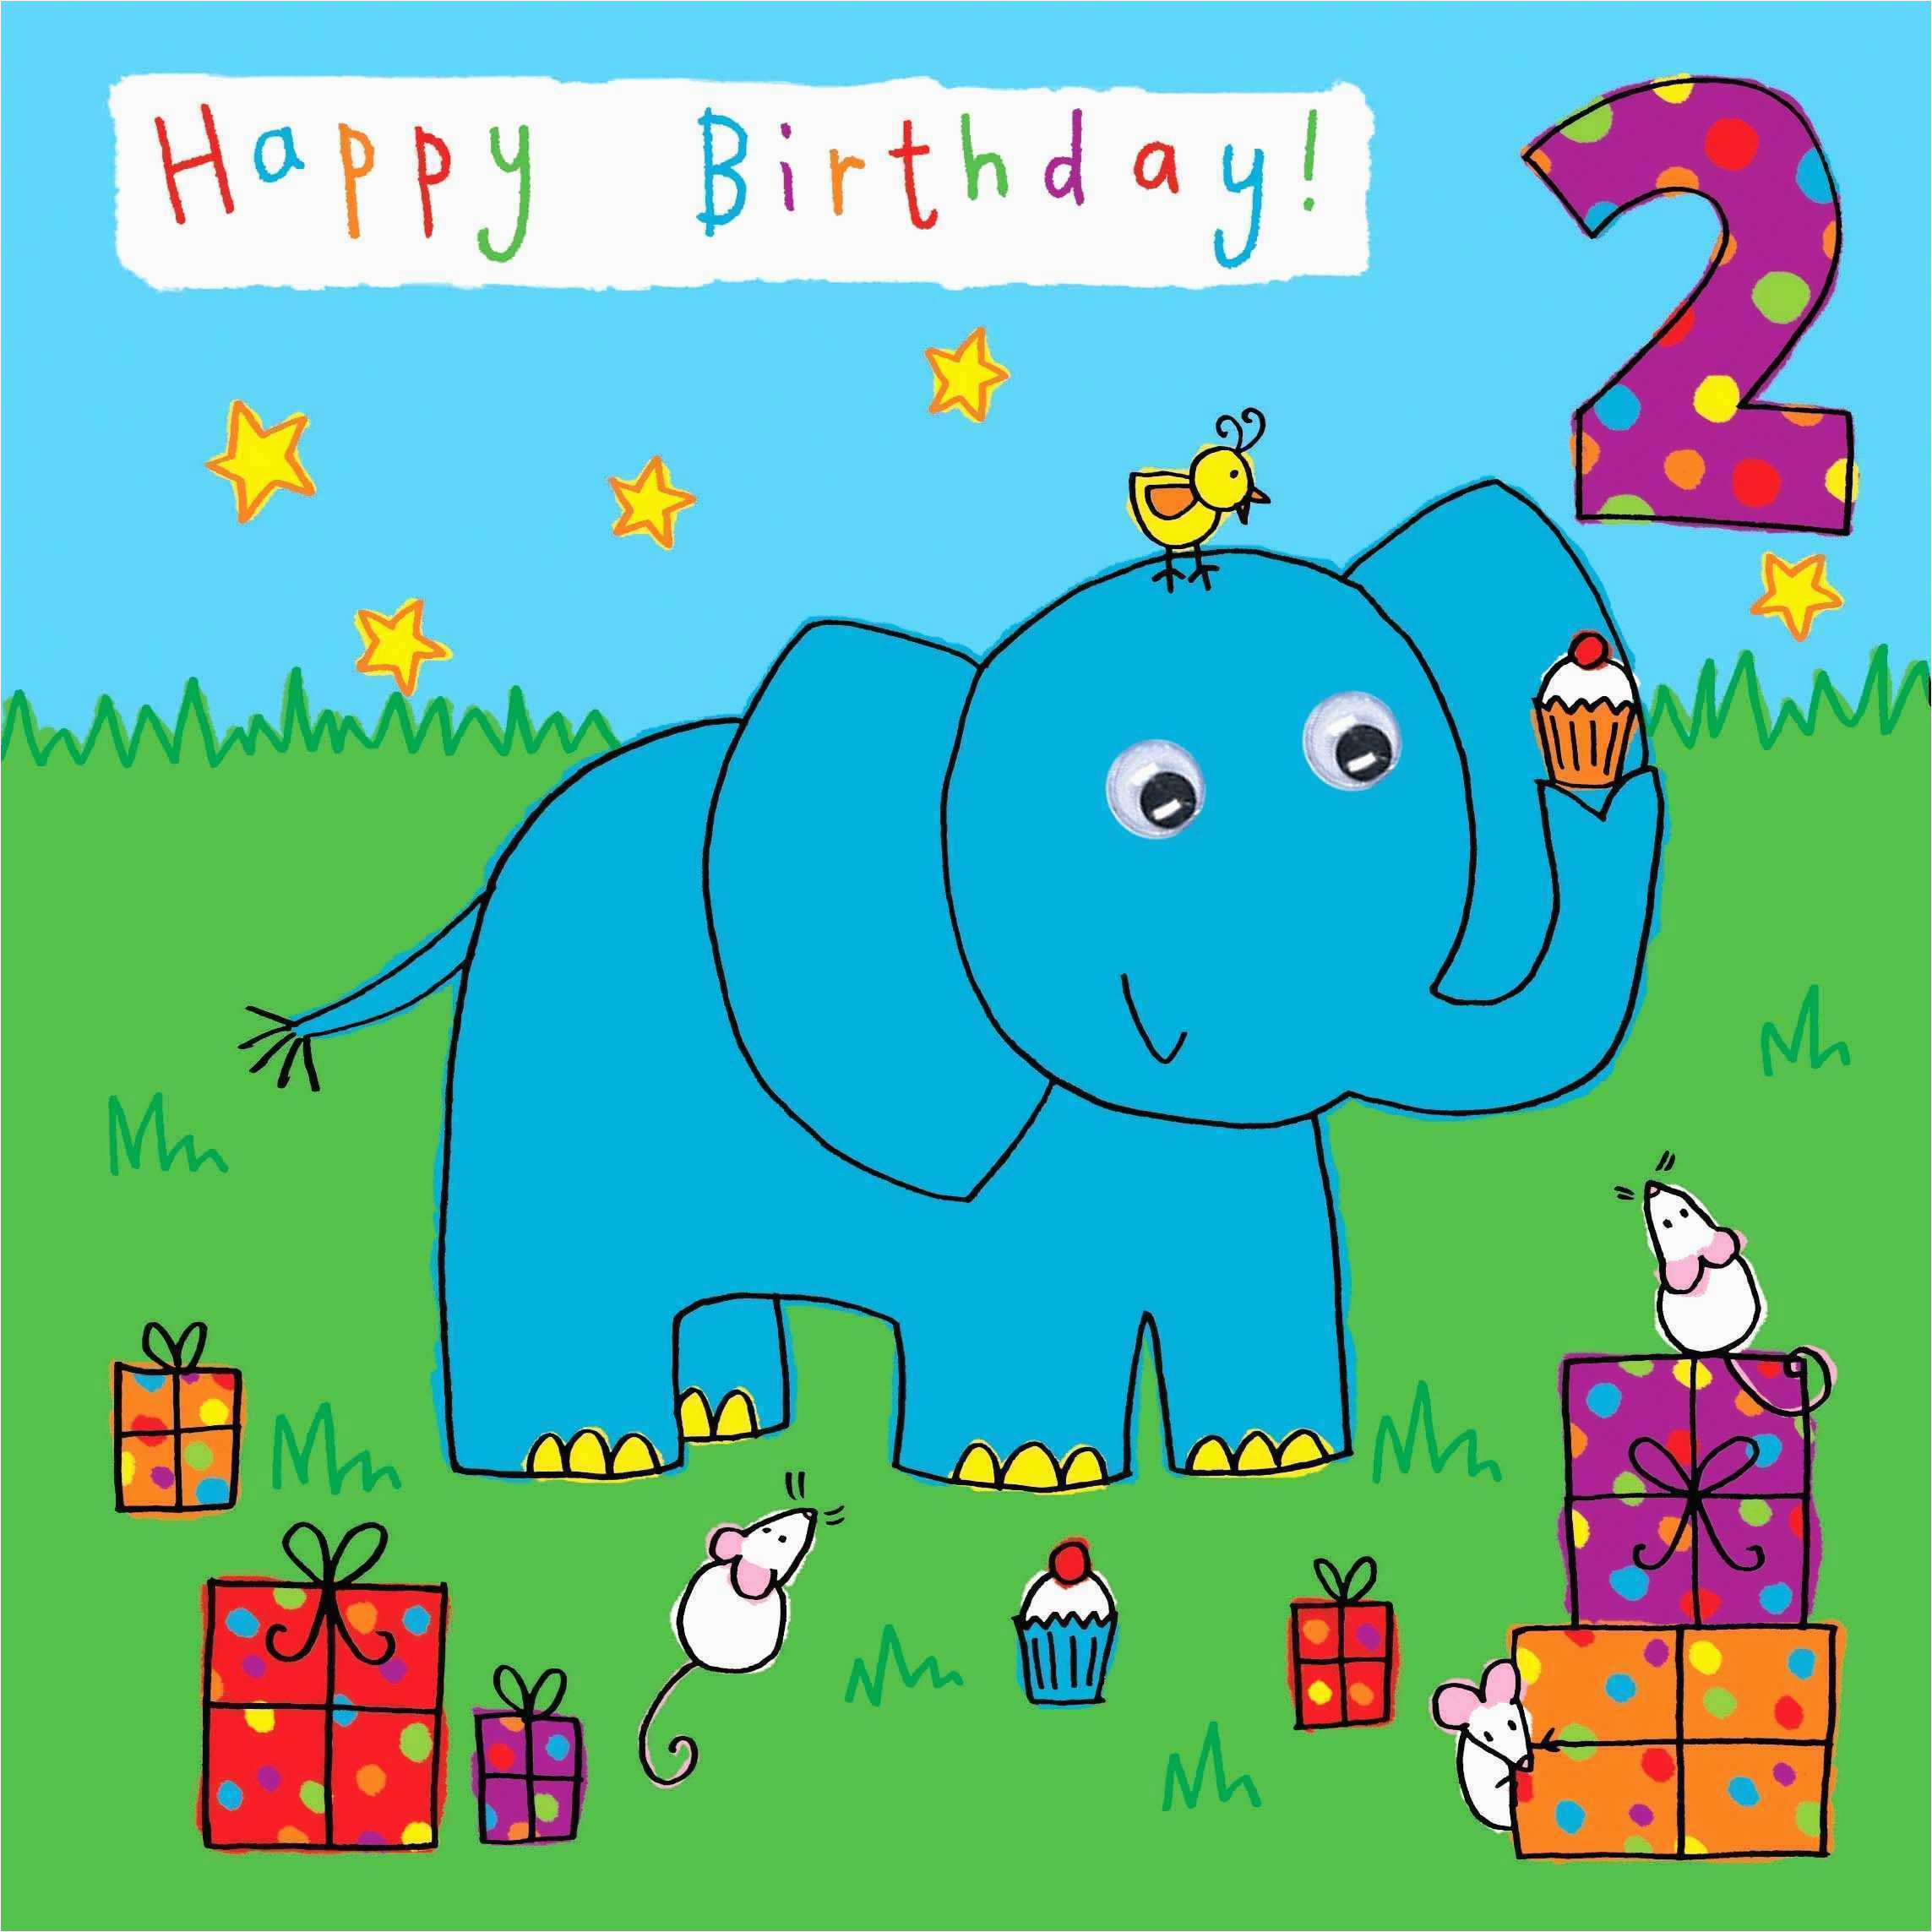 Email Birthday Cards for Kids Email Birthday Cards Best Of Email Birthday Cards for Kids